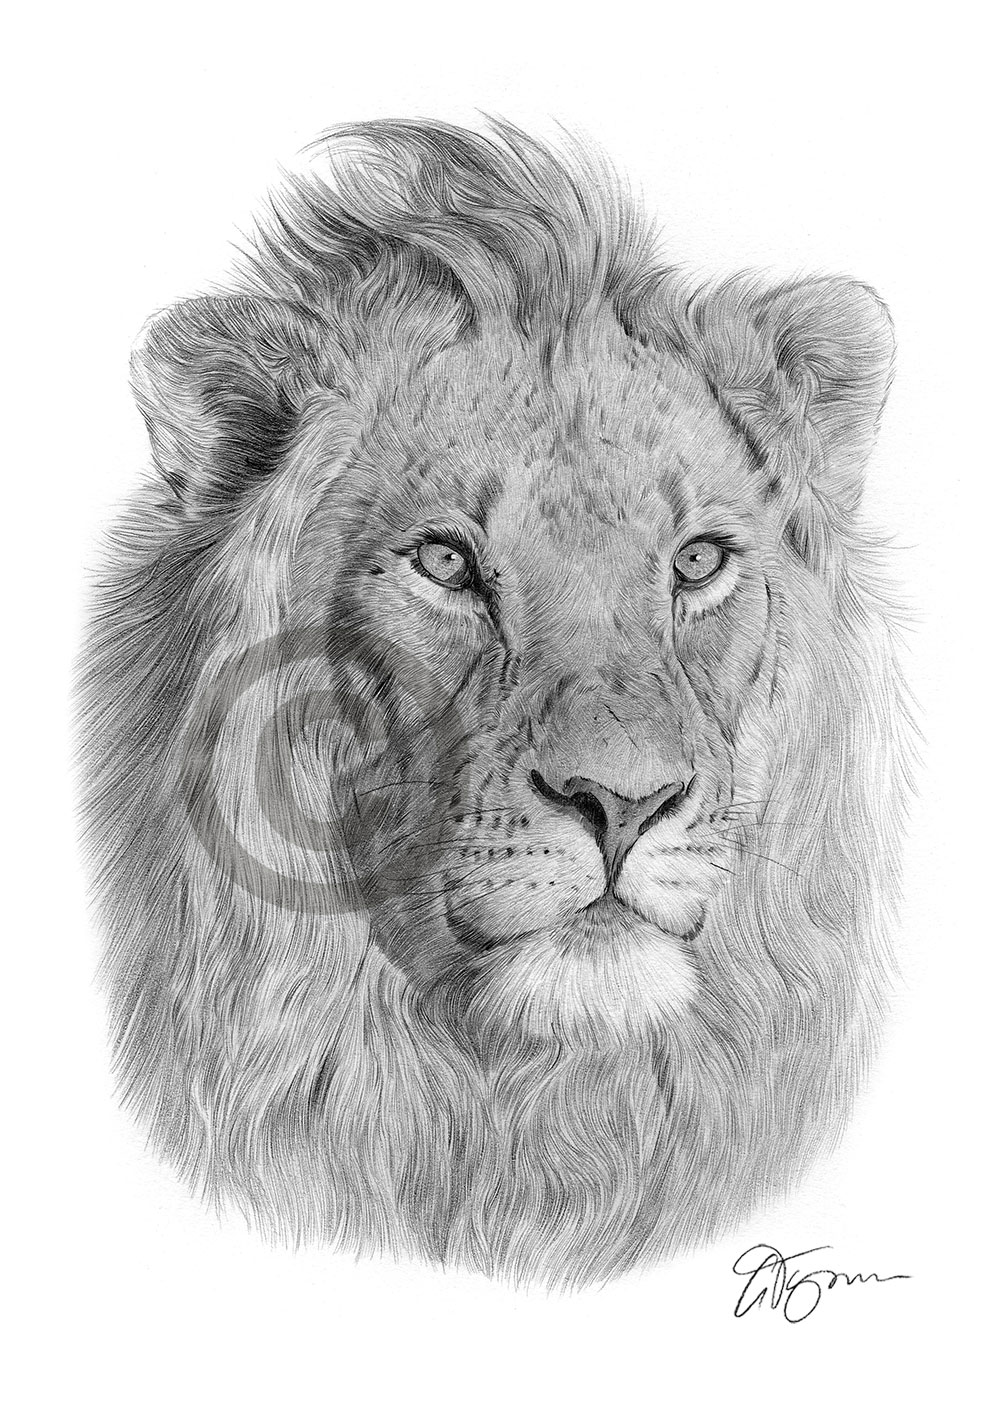 Pencil drawing of an African lion by artist Gary Tymon